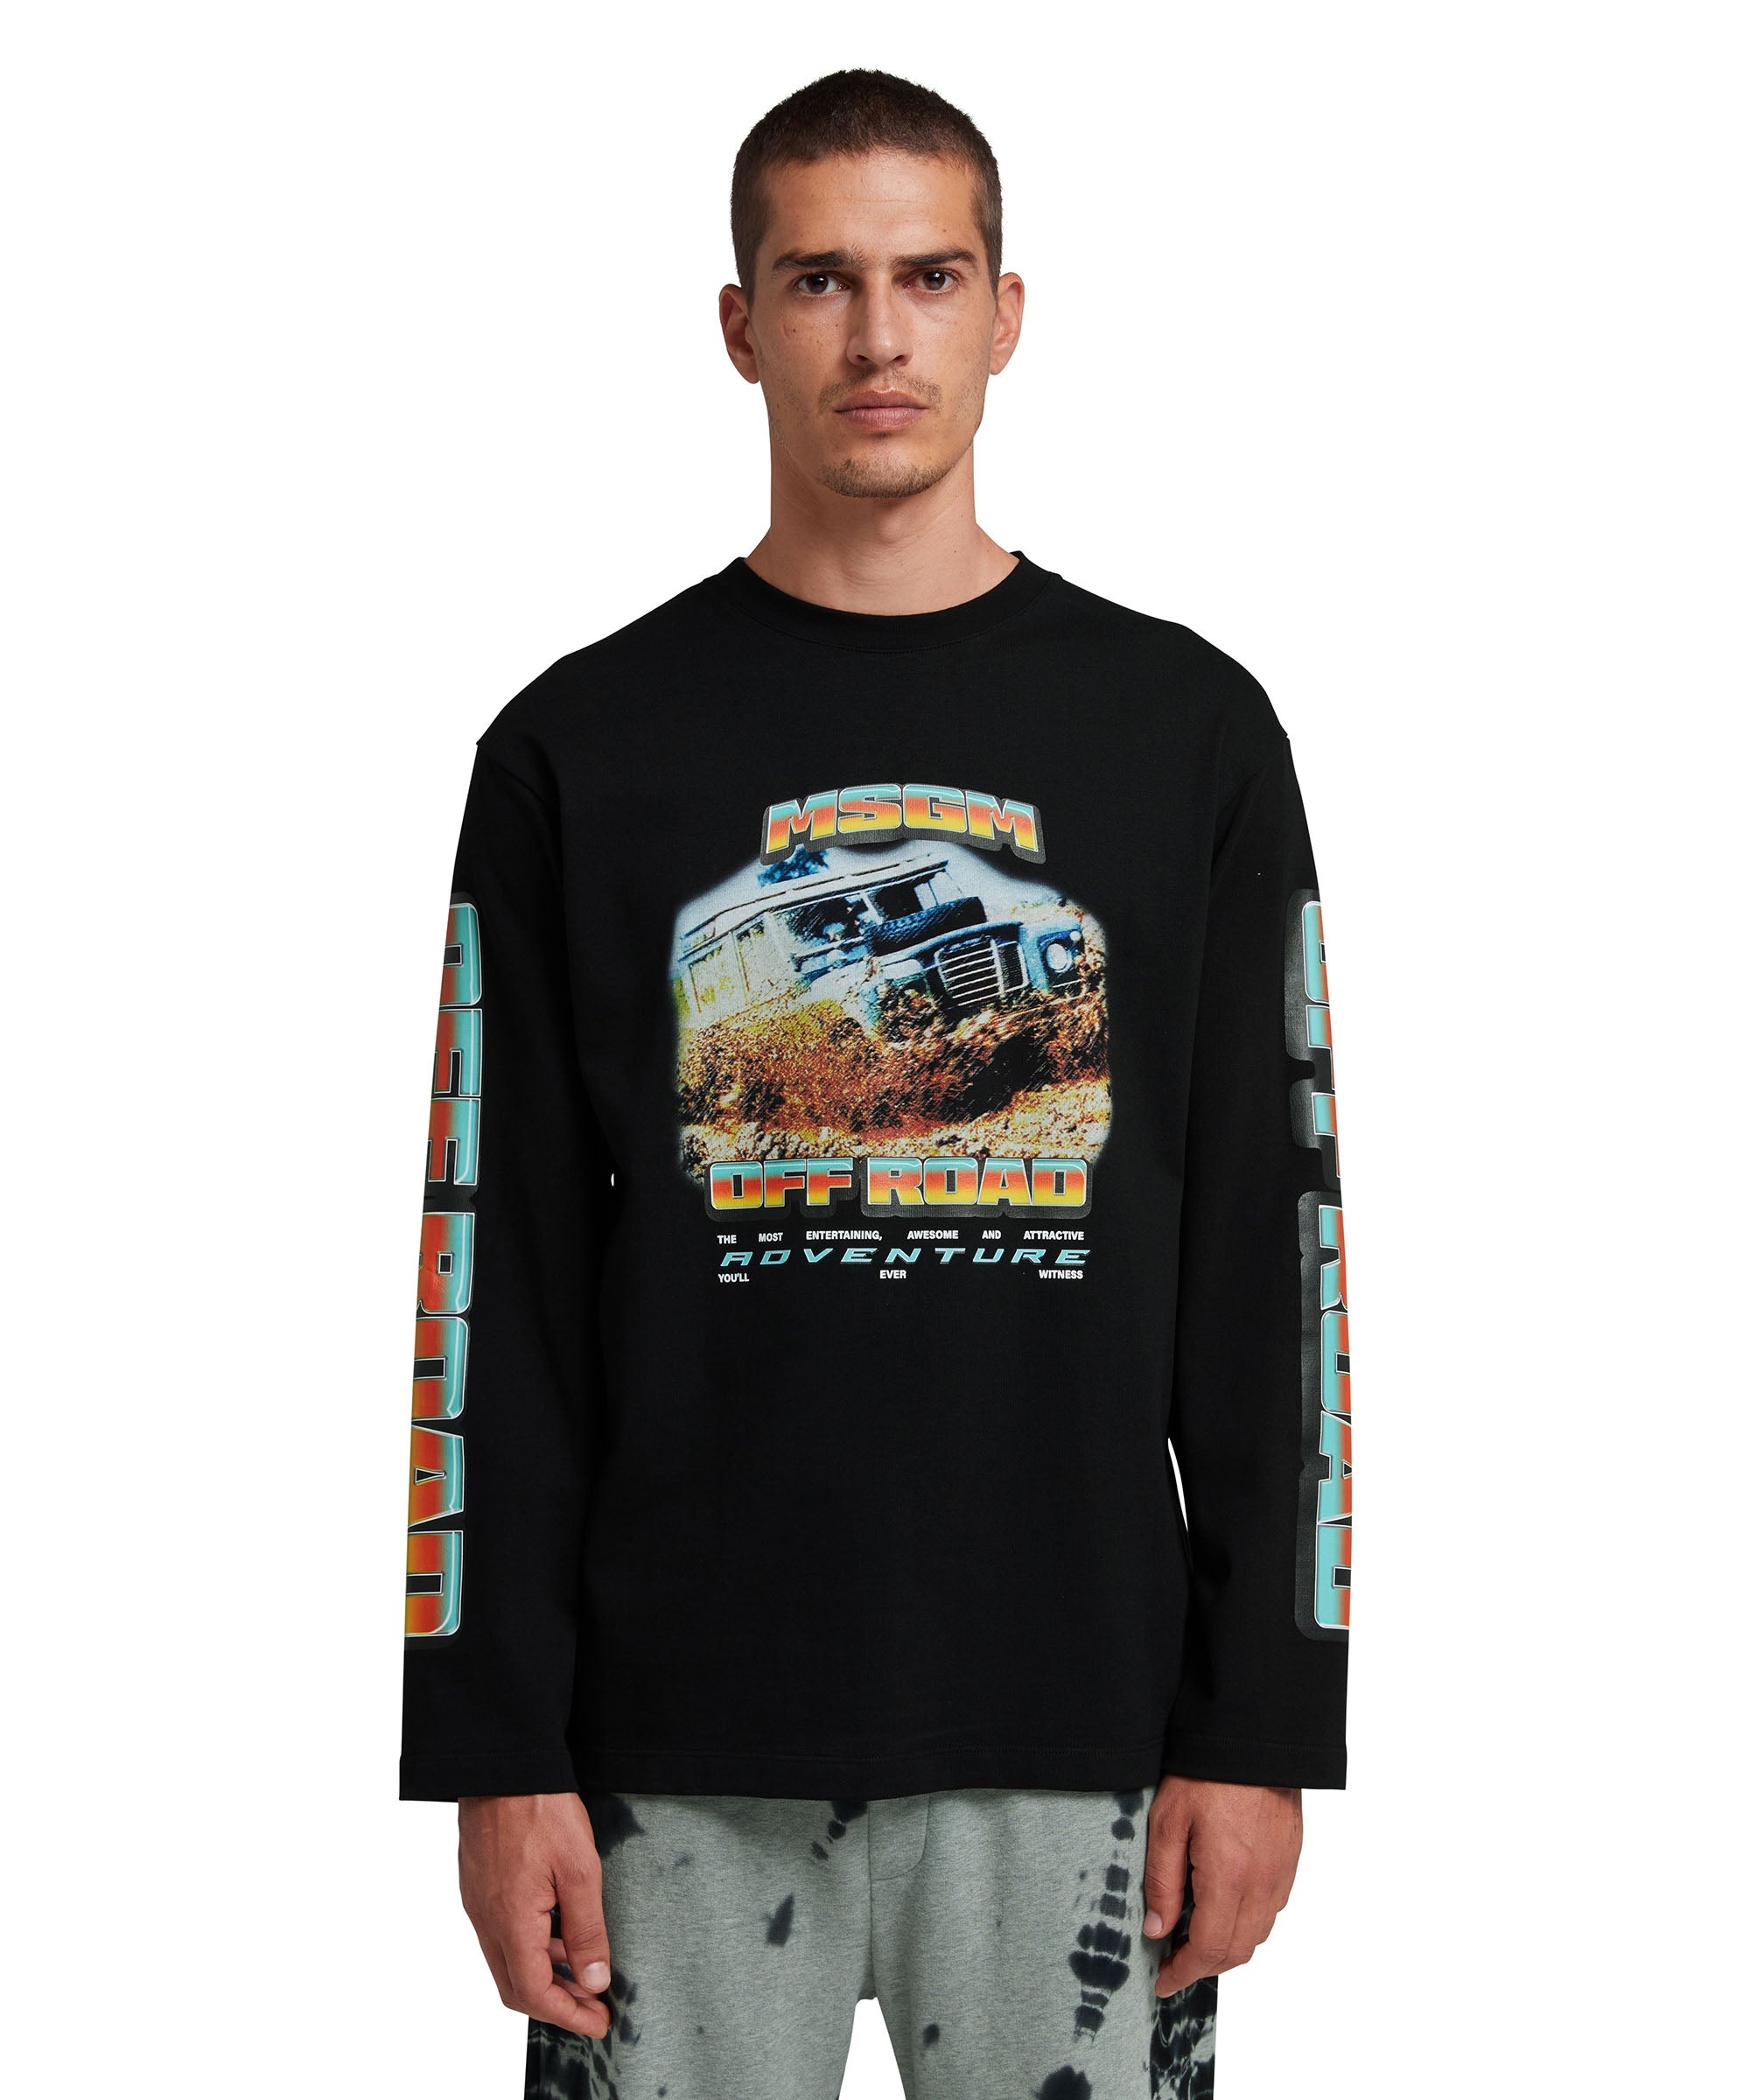 Long sleeve T-Shirt with "off road" graphic - 2